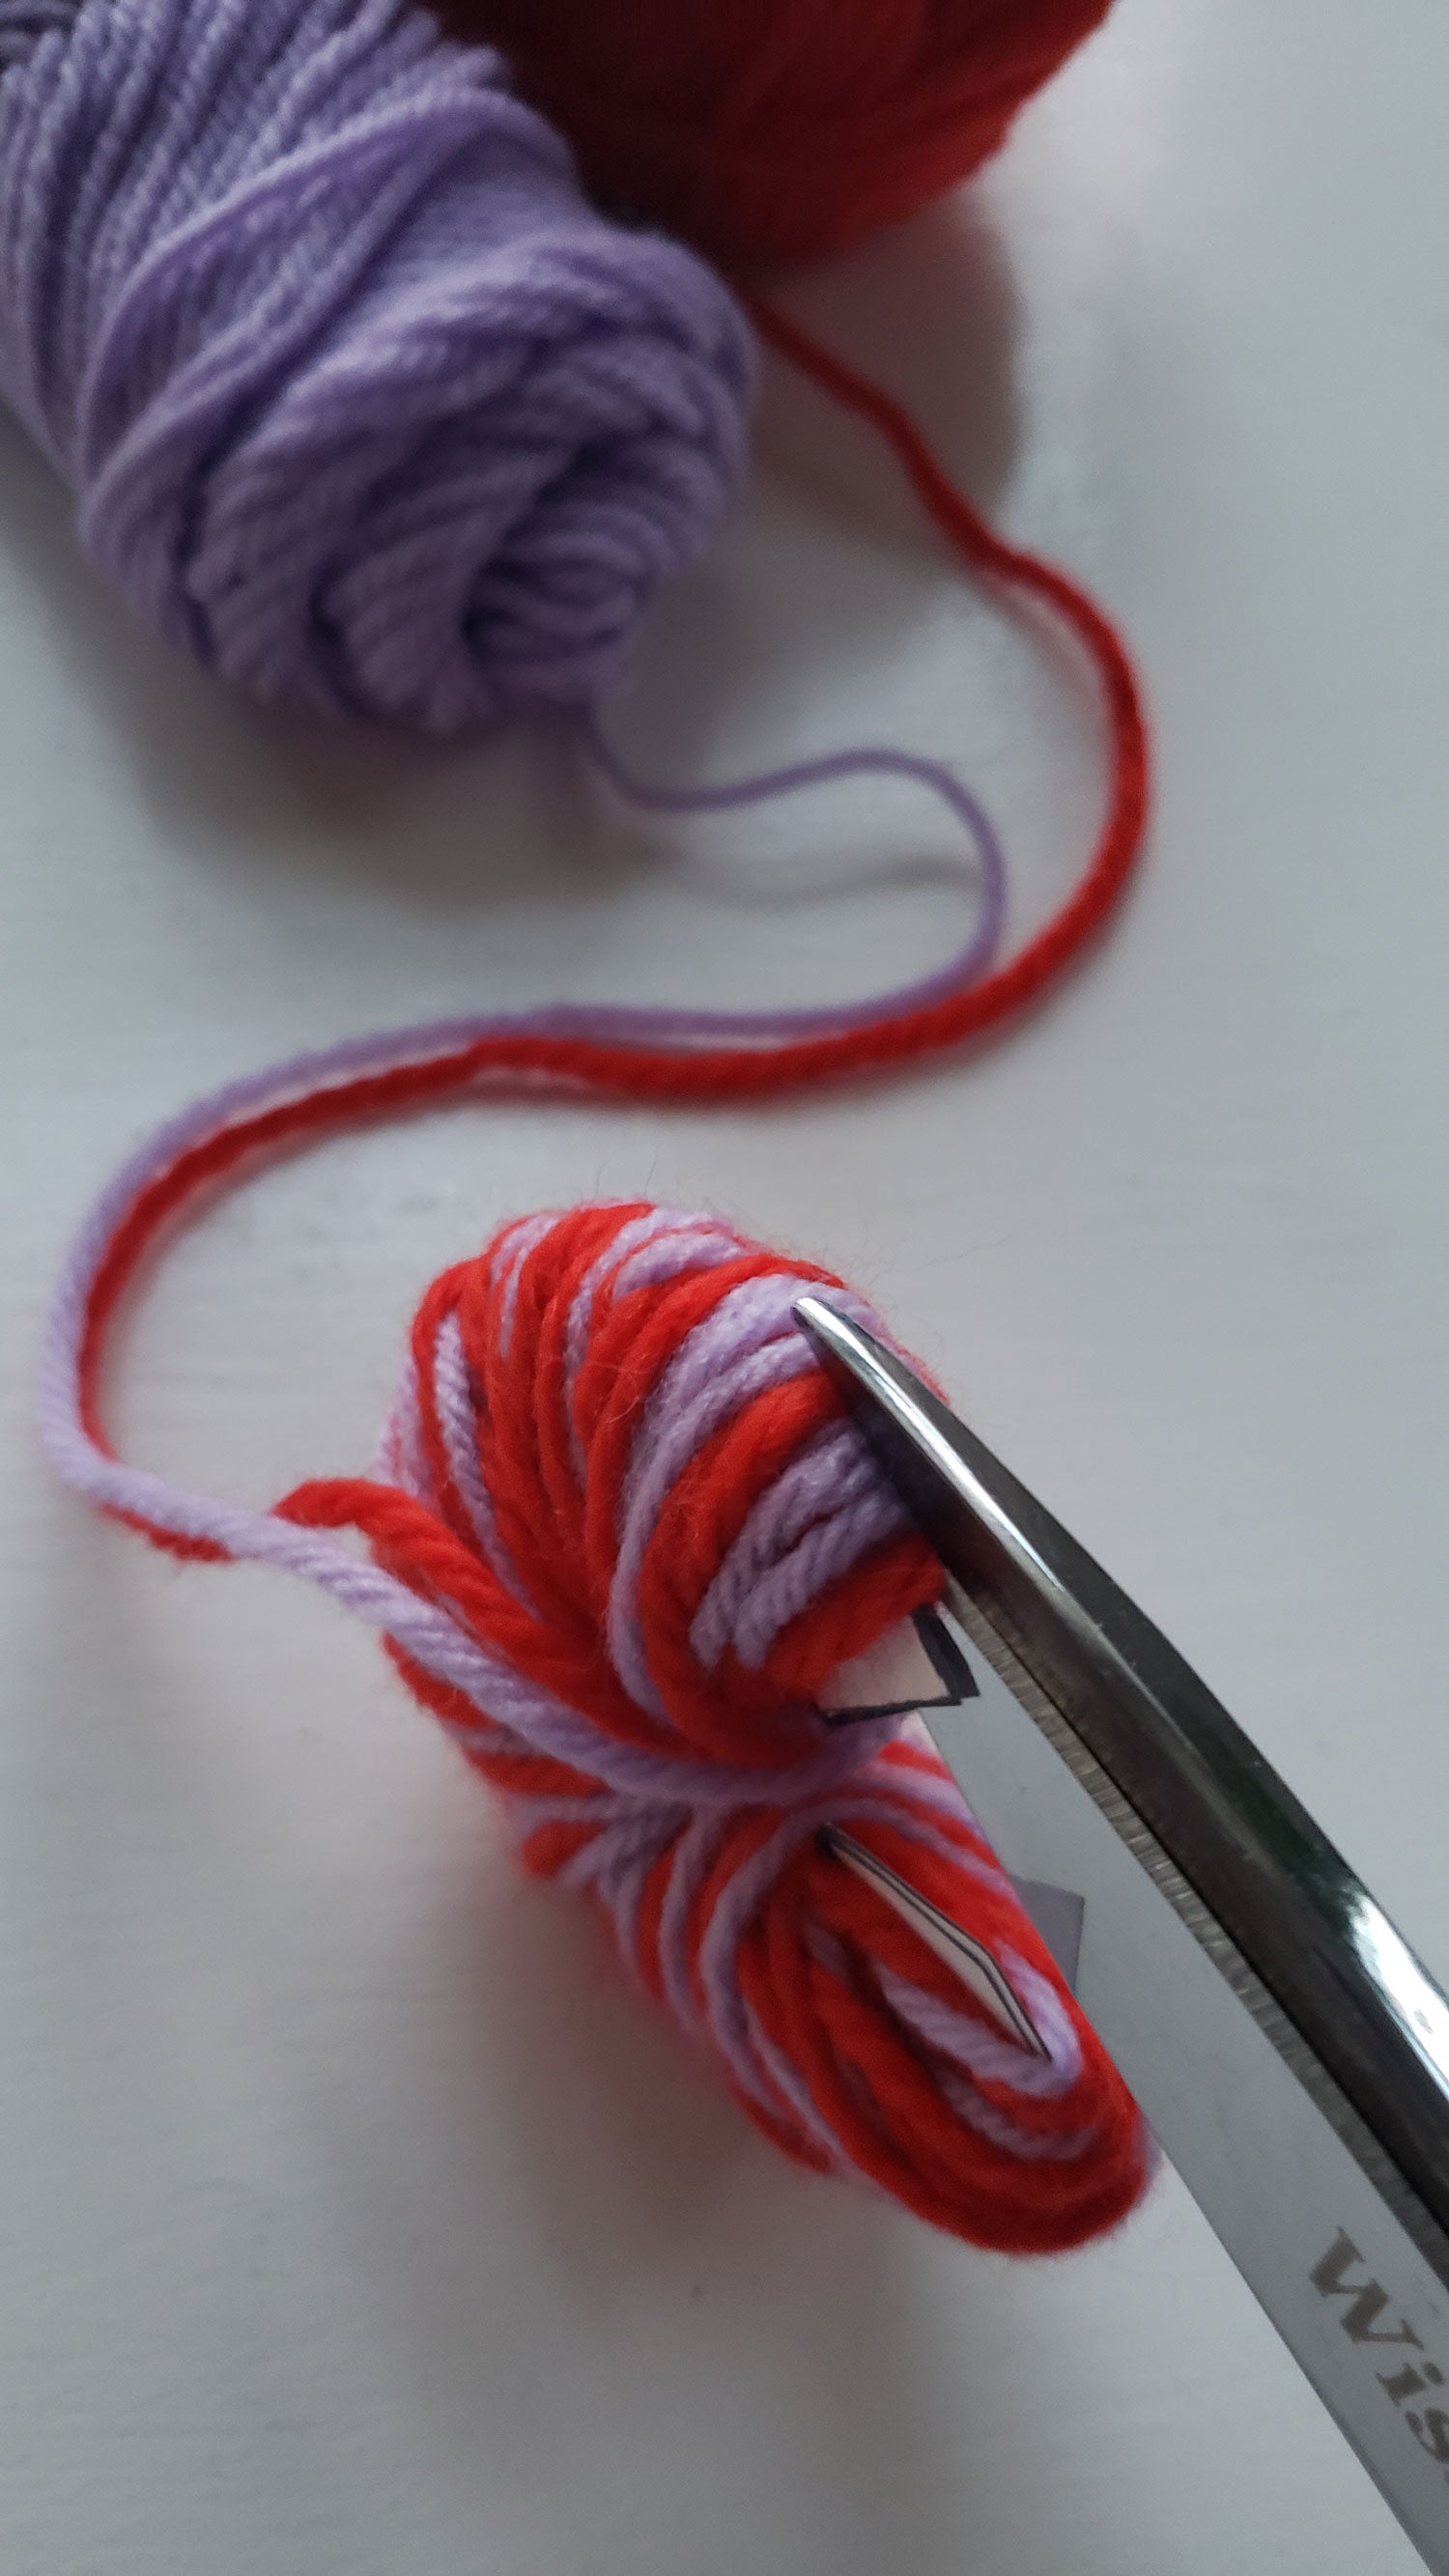 yarns being cut along the edge of the pom pom maker